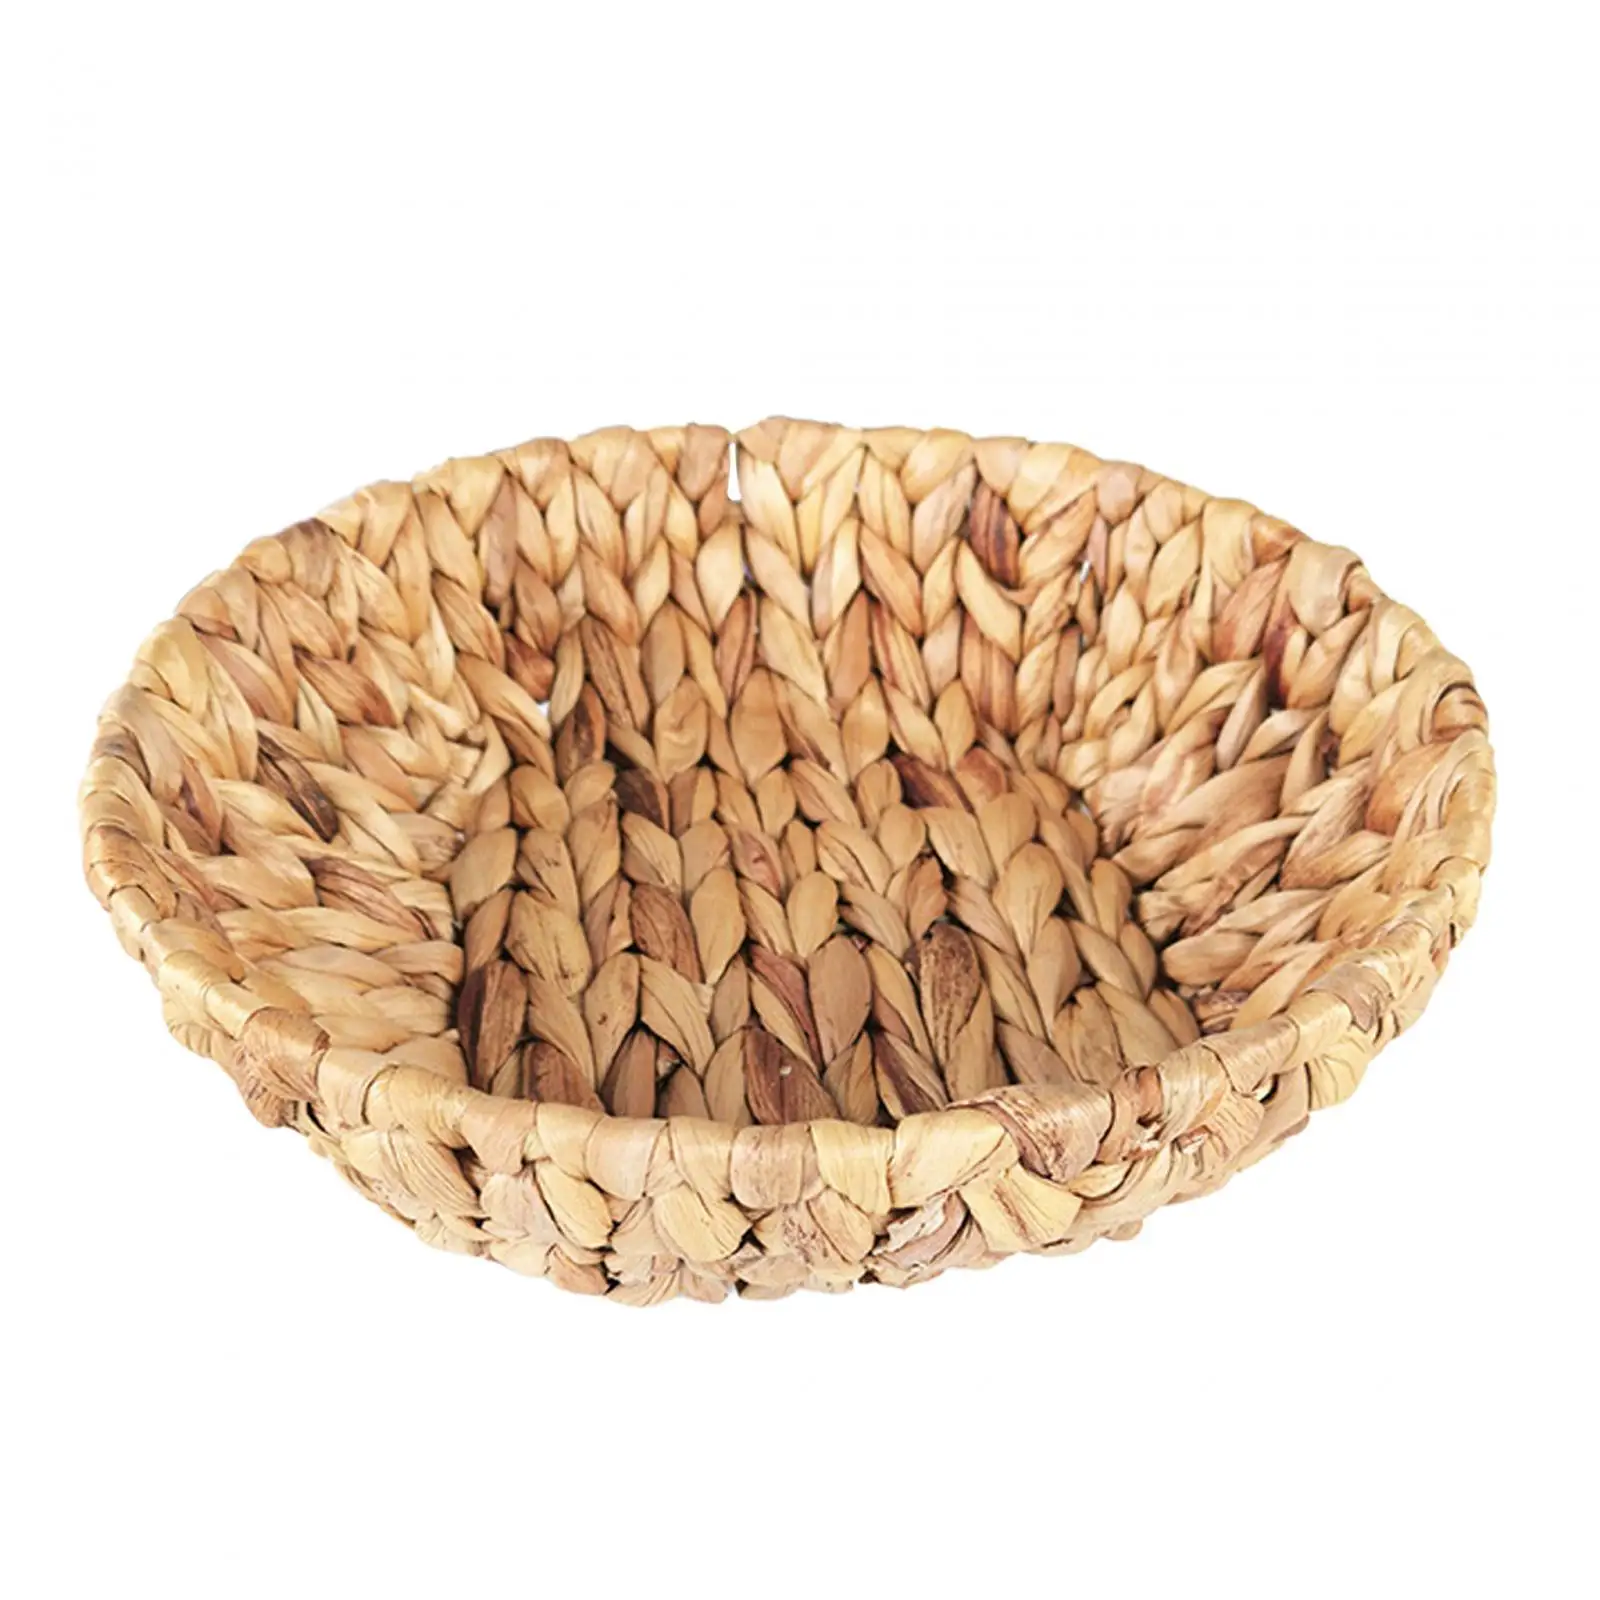 Round Grass Storage Bin Home Decorative Wicker Serving Tray Woven Seagrass Tray for Tea Coffee Table Fruit